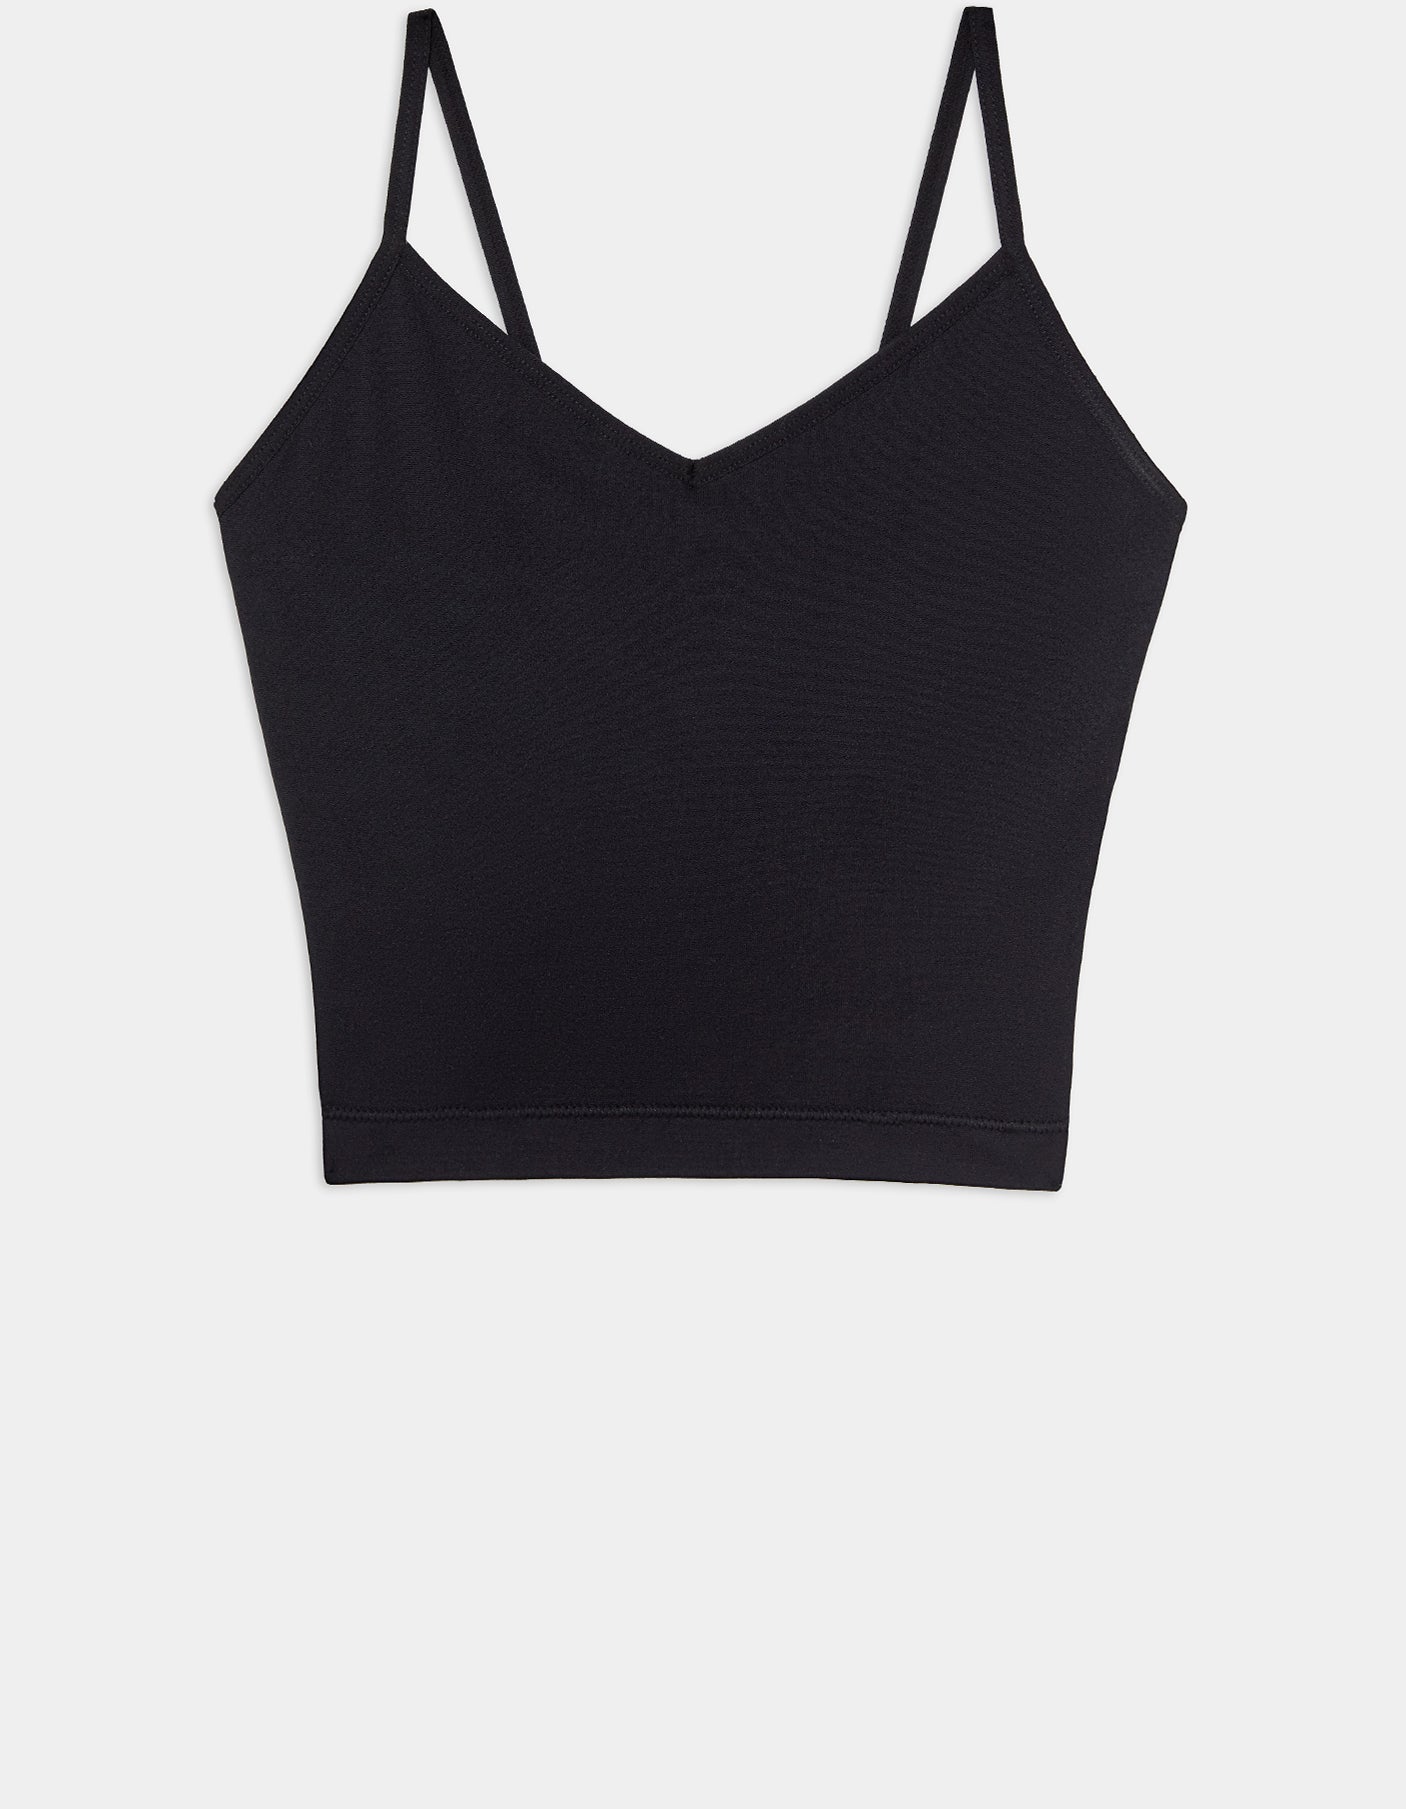 Splits59 Black Mesh Strappy Workout Top- Size S – The Saved Collection